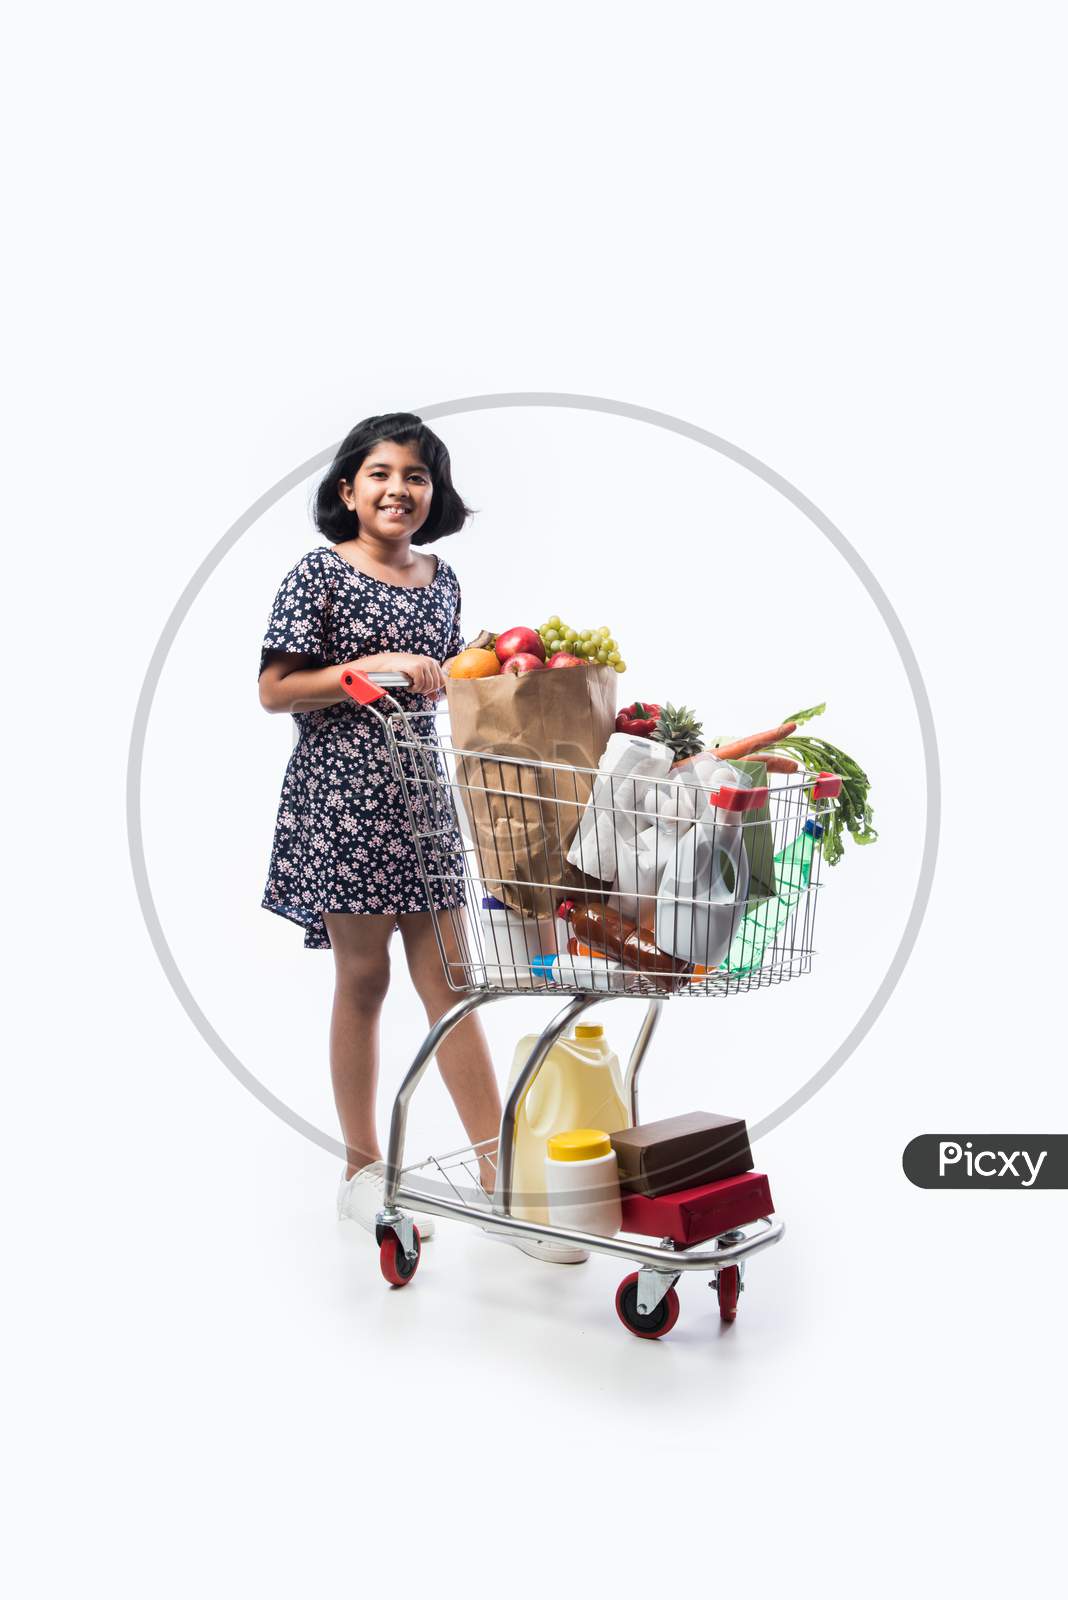 Indian Small Girl With Shopping Cart Full Of Groceries, Vegetables And Fruits